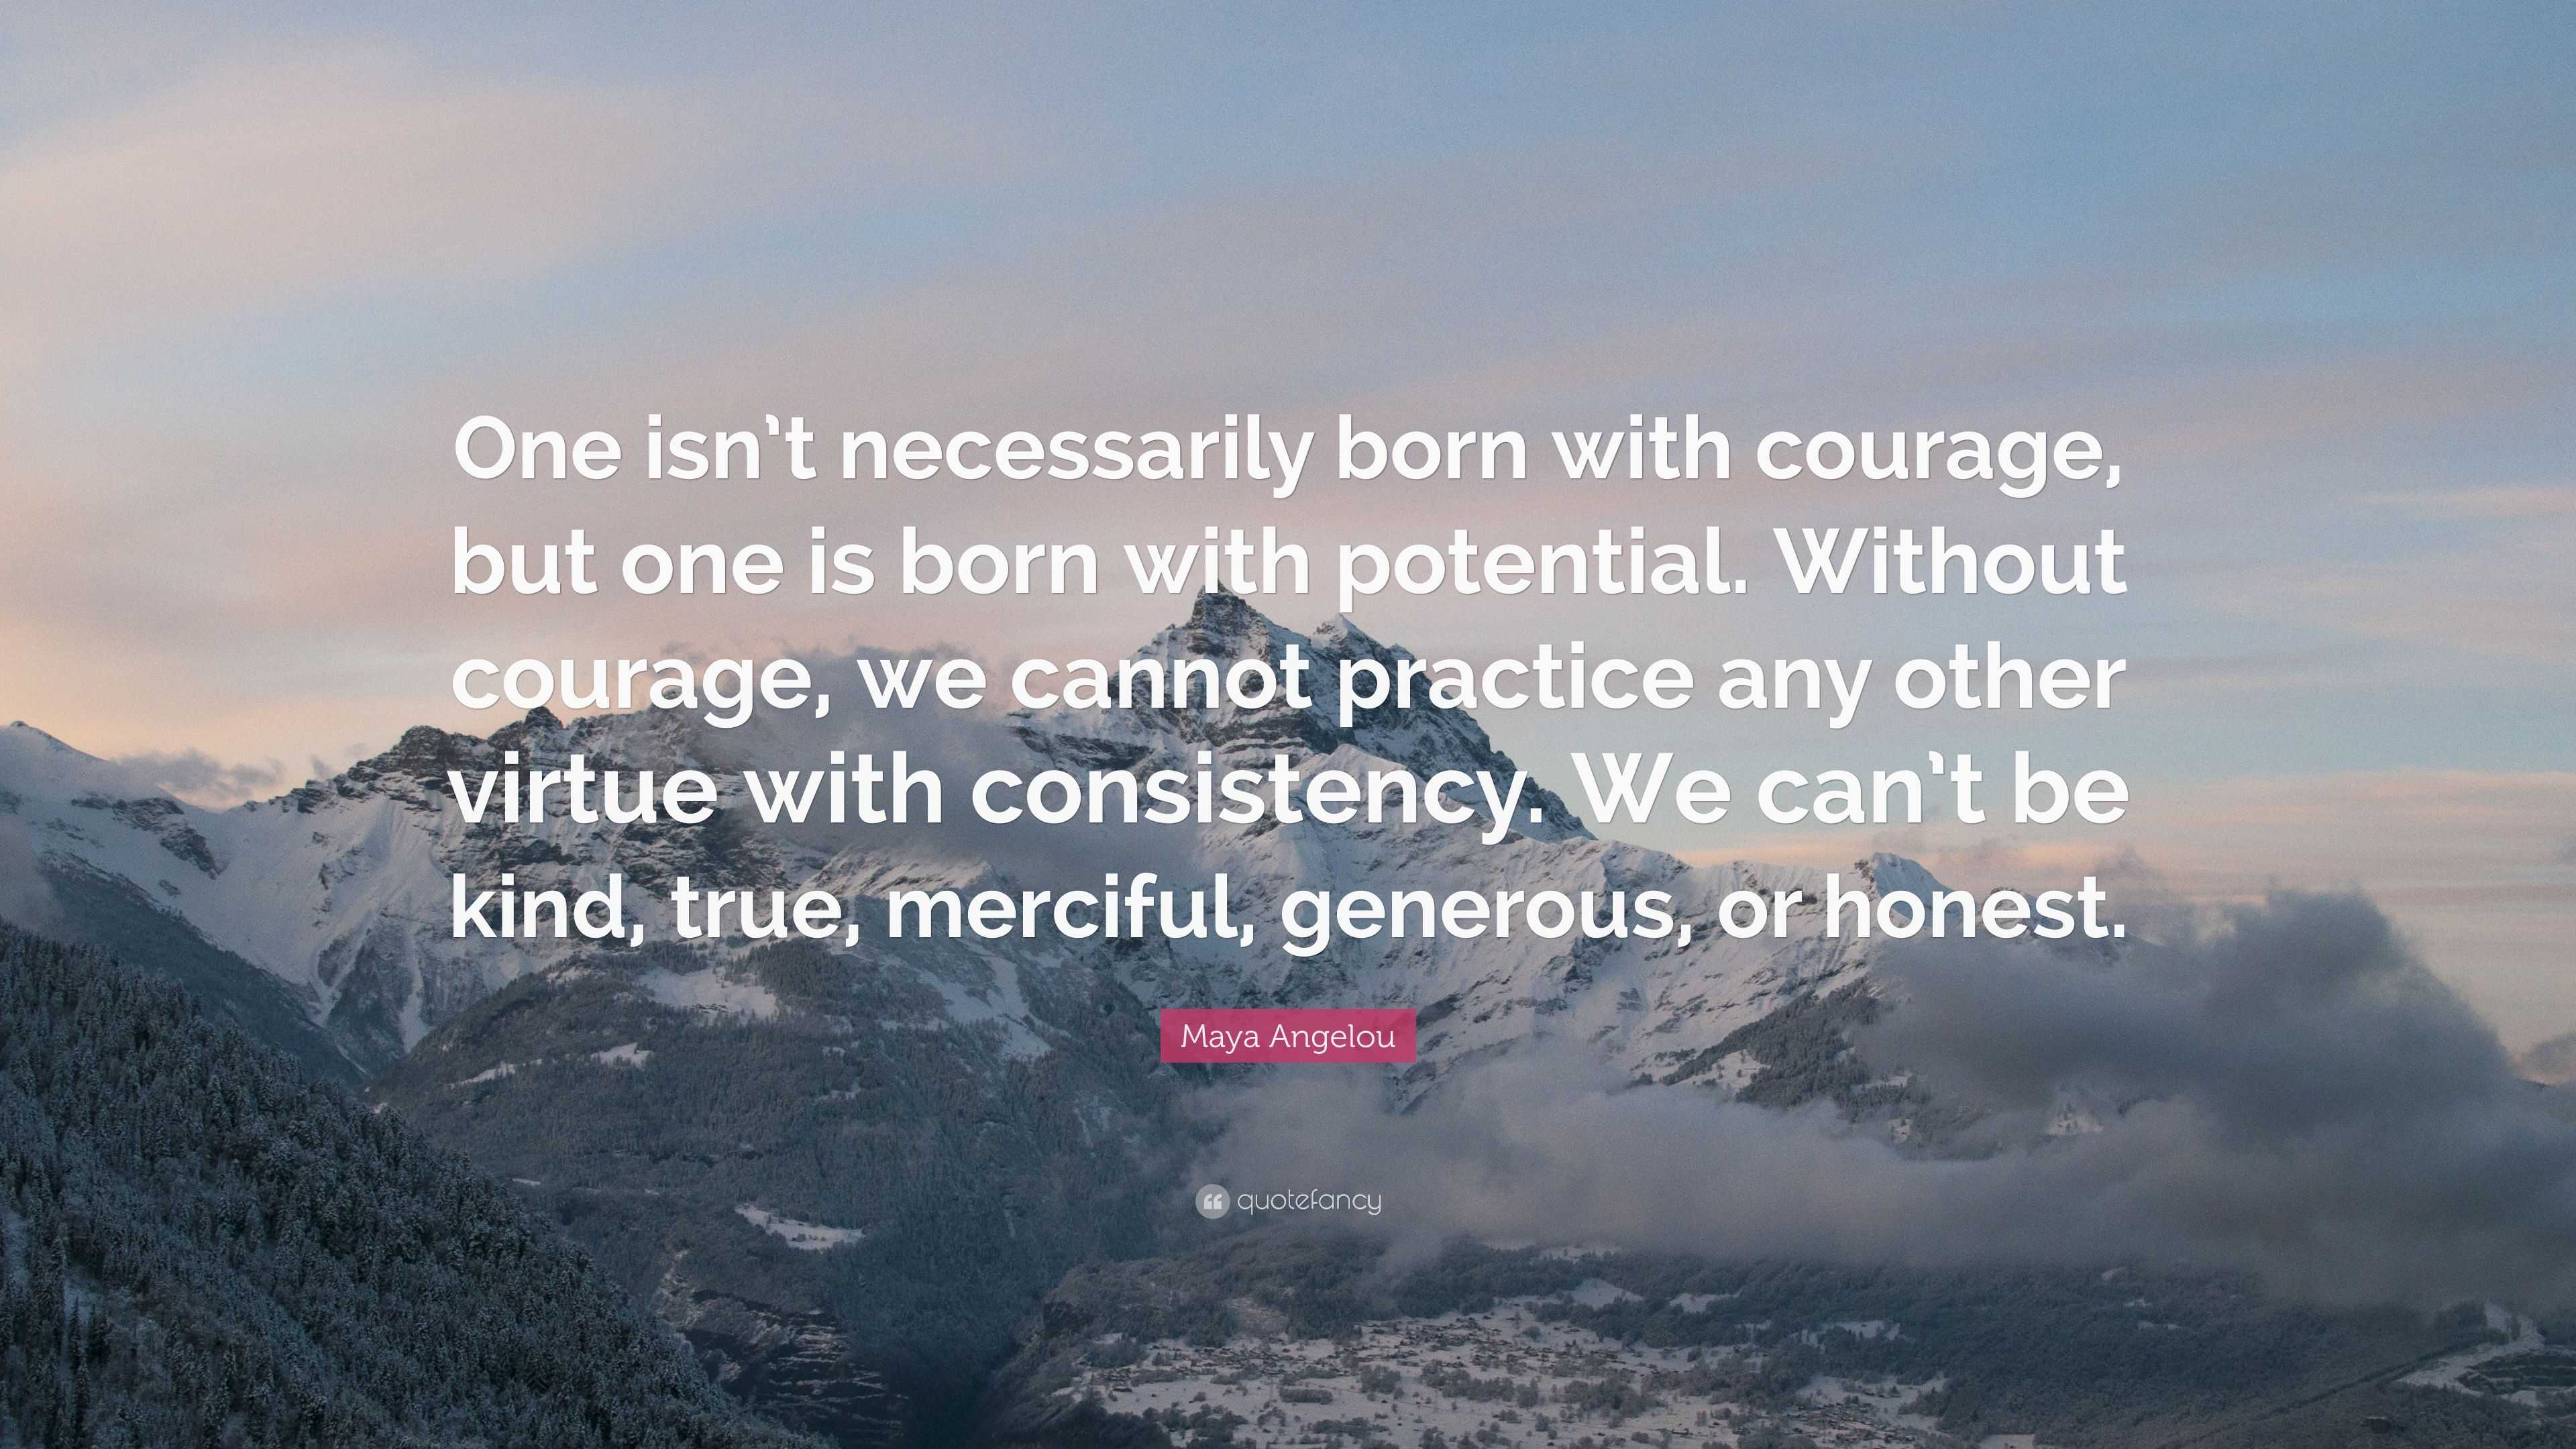 Maya Angelou Quote: “One isn’t necessarily born with courage, but one ...